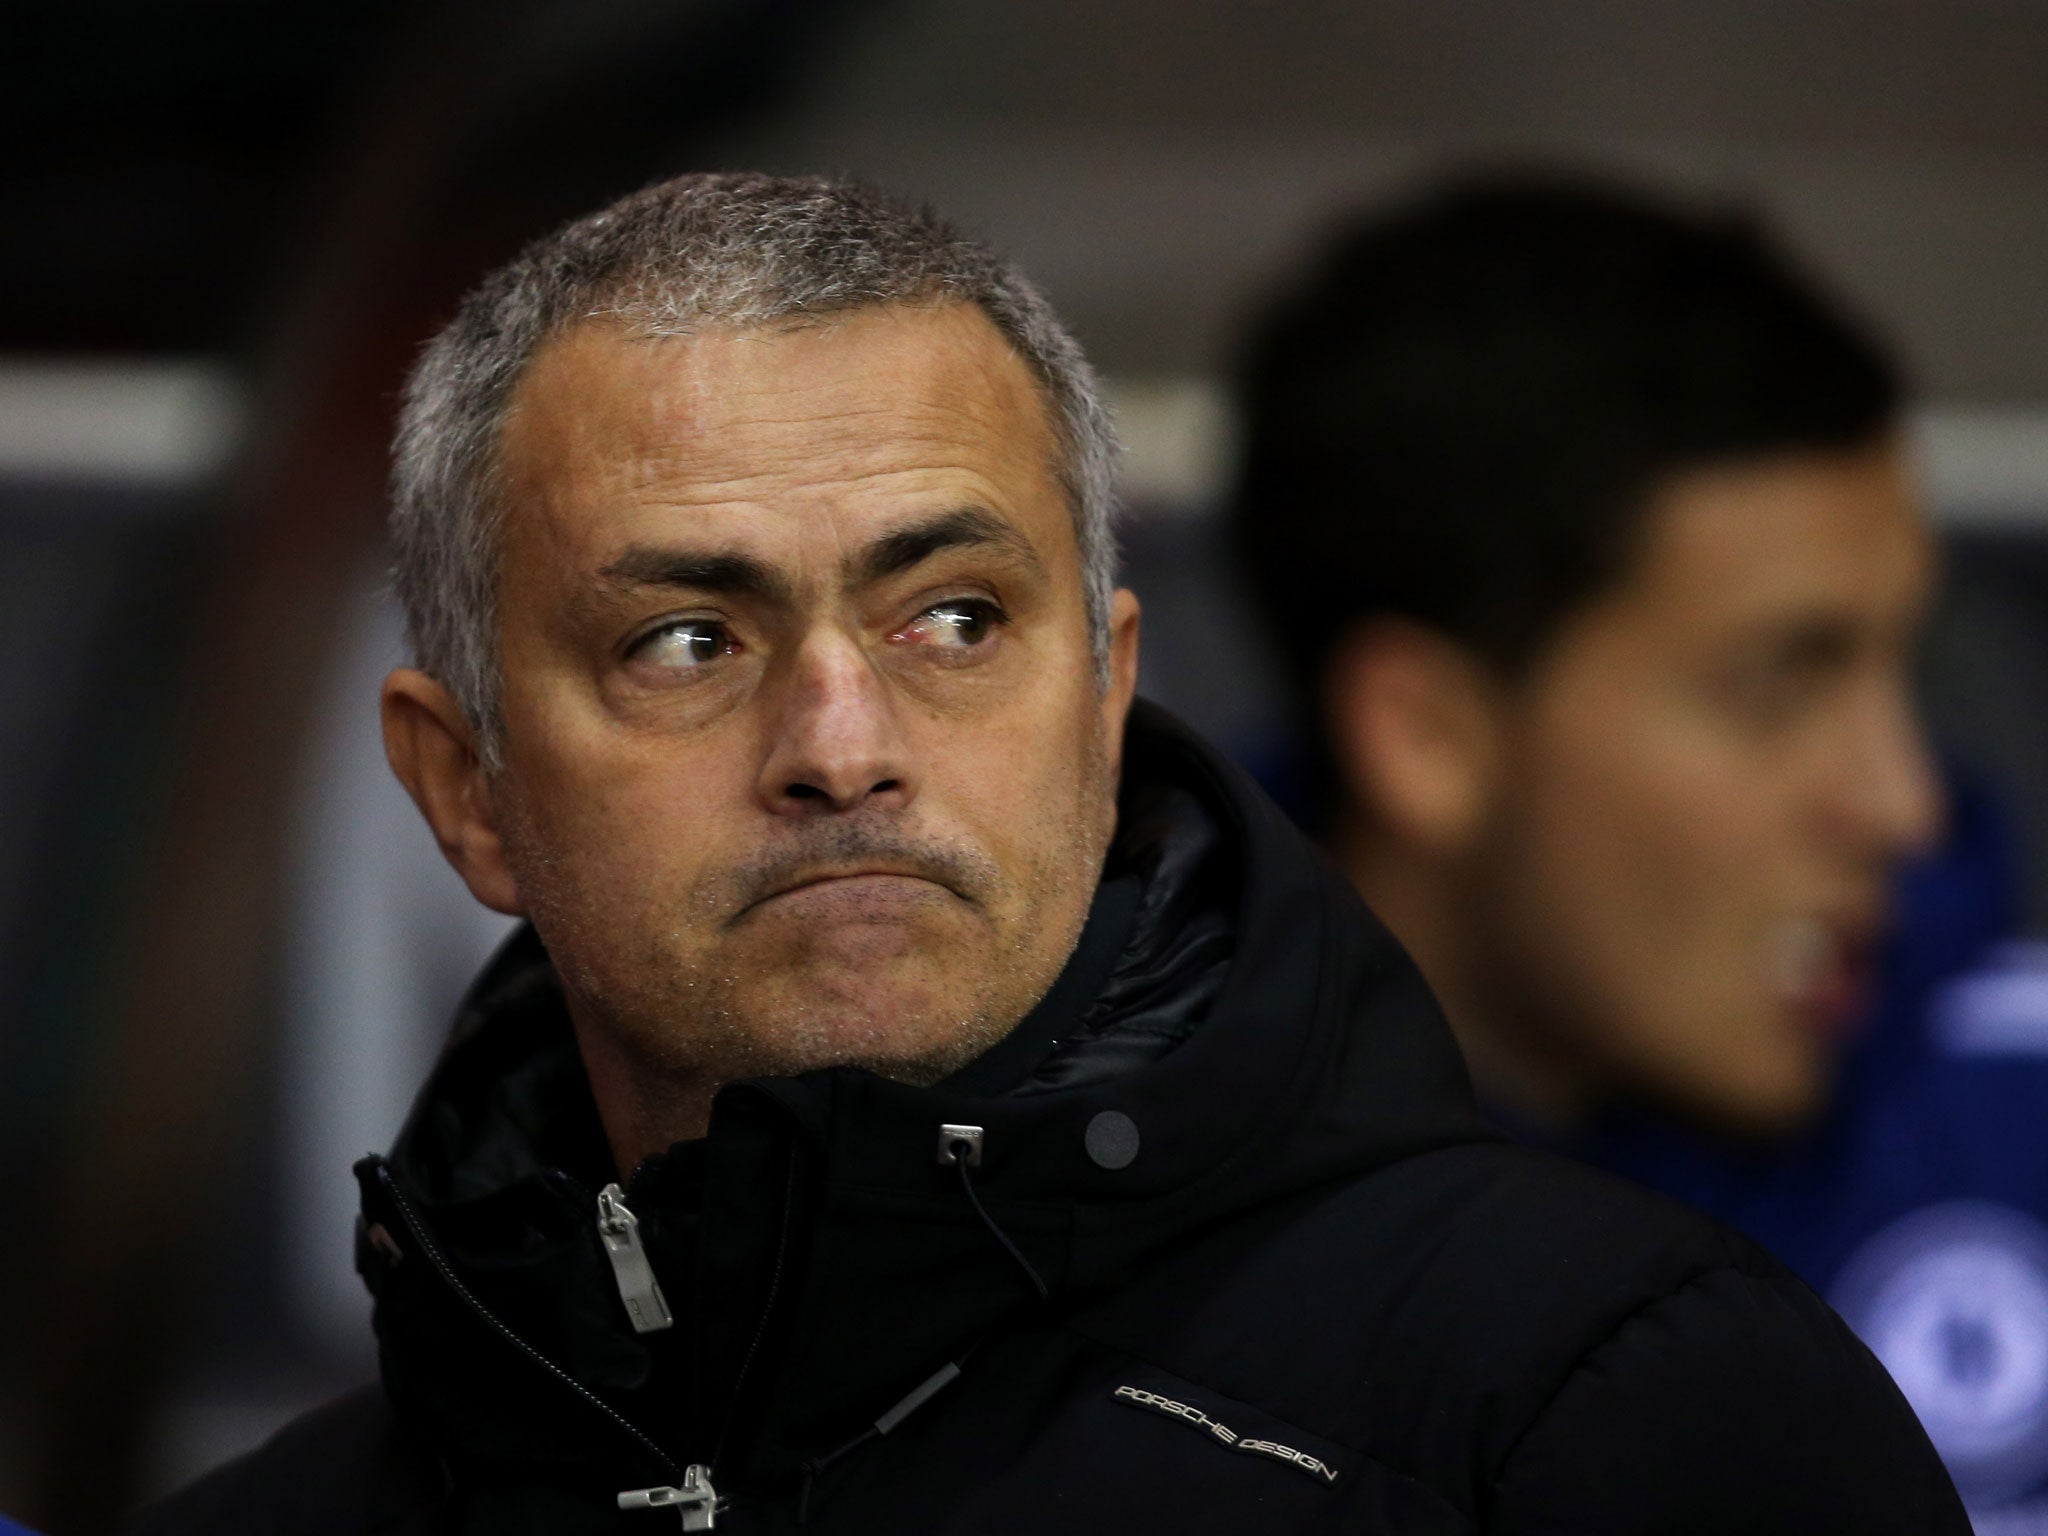 Jose Mourinho's Chelsea face Swansea City on Boxing Day